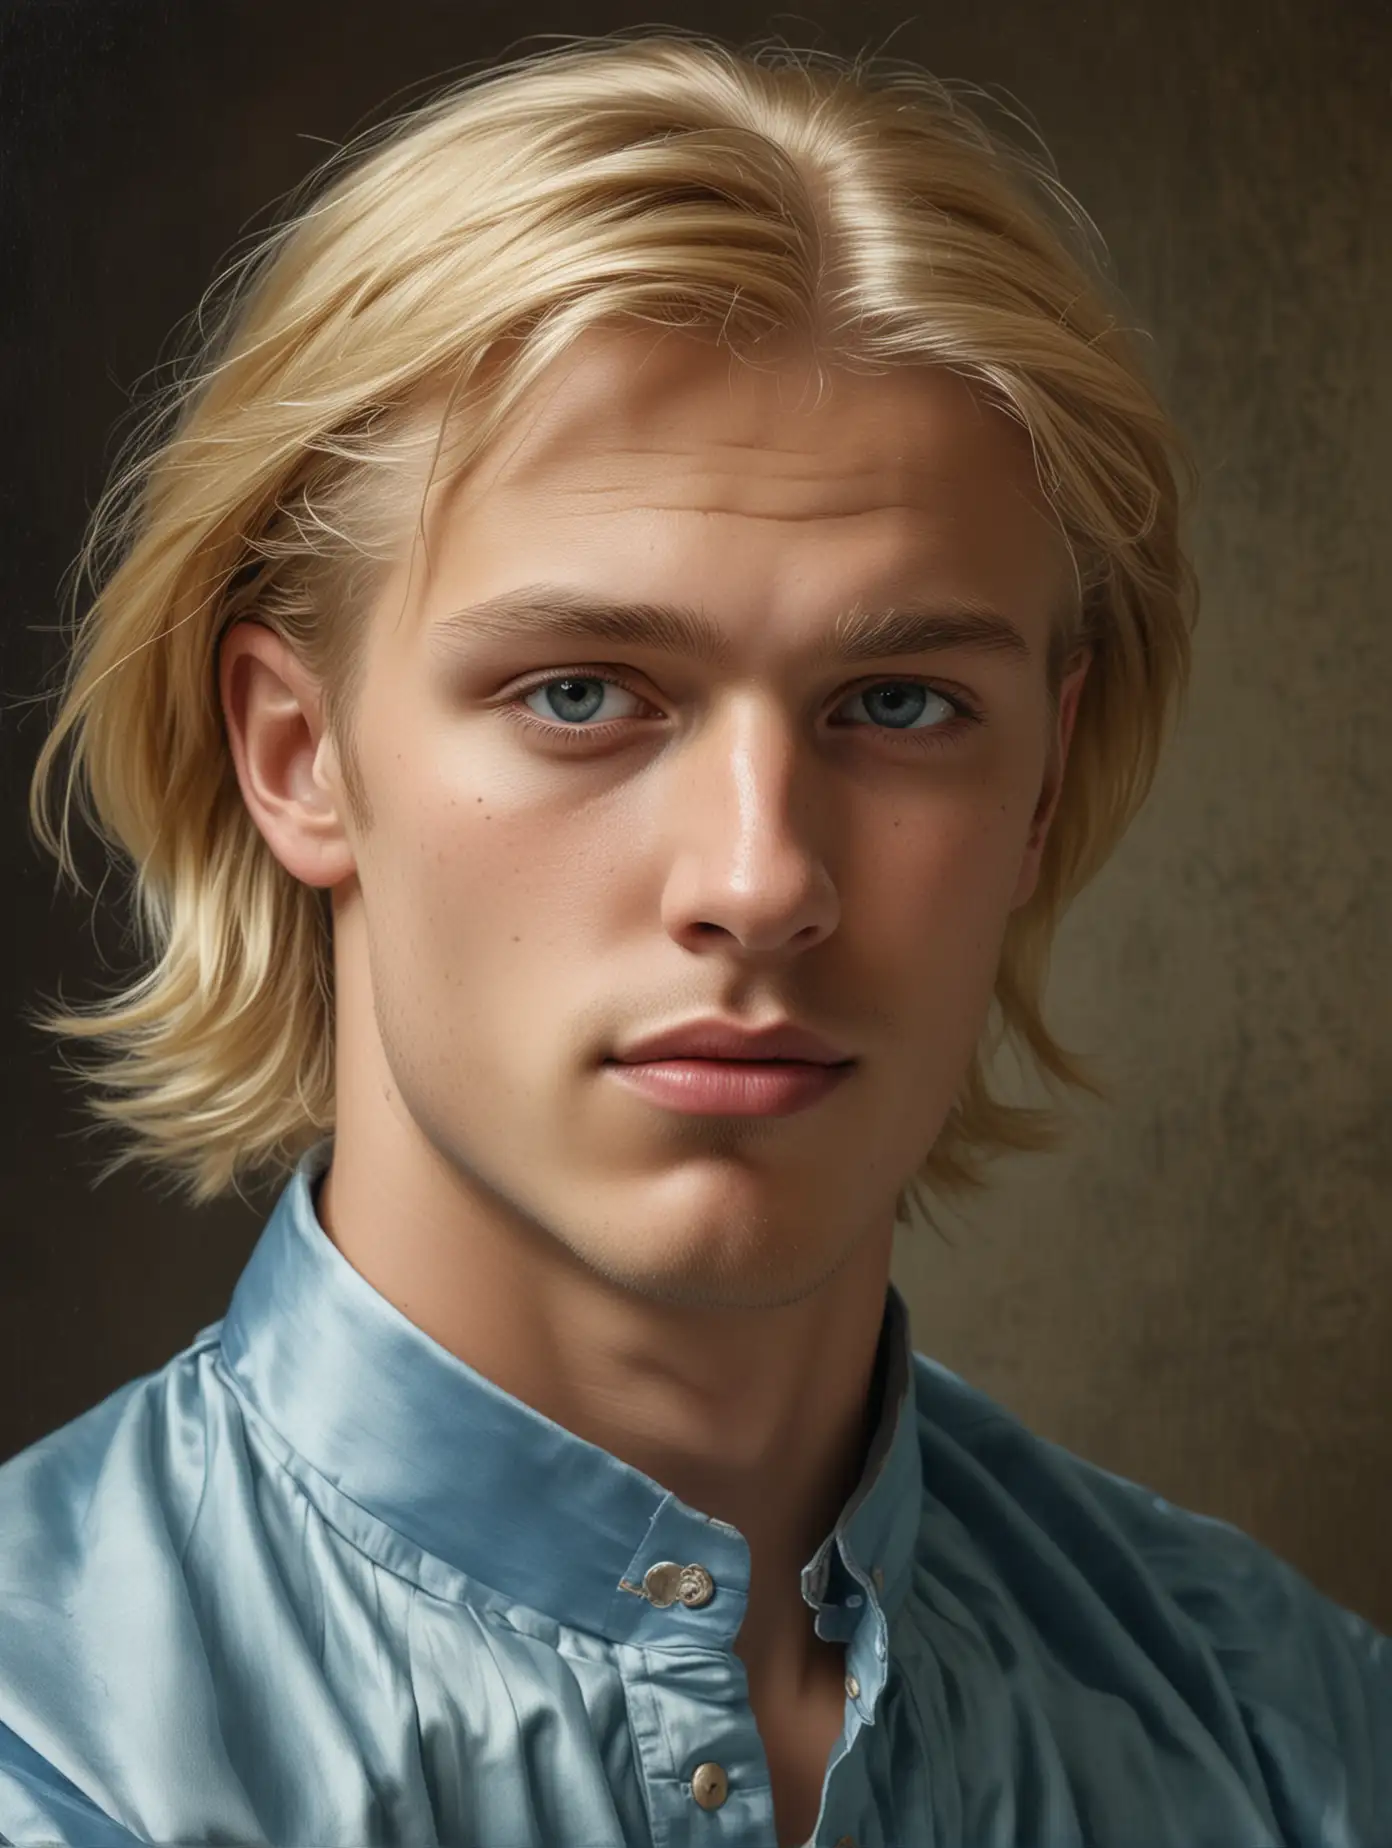 i am an fine artist. make me a close up portrait of a joung  handsome Swedish man with blond hair and a light blue blouse in Vermeer style